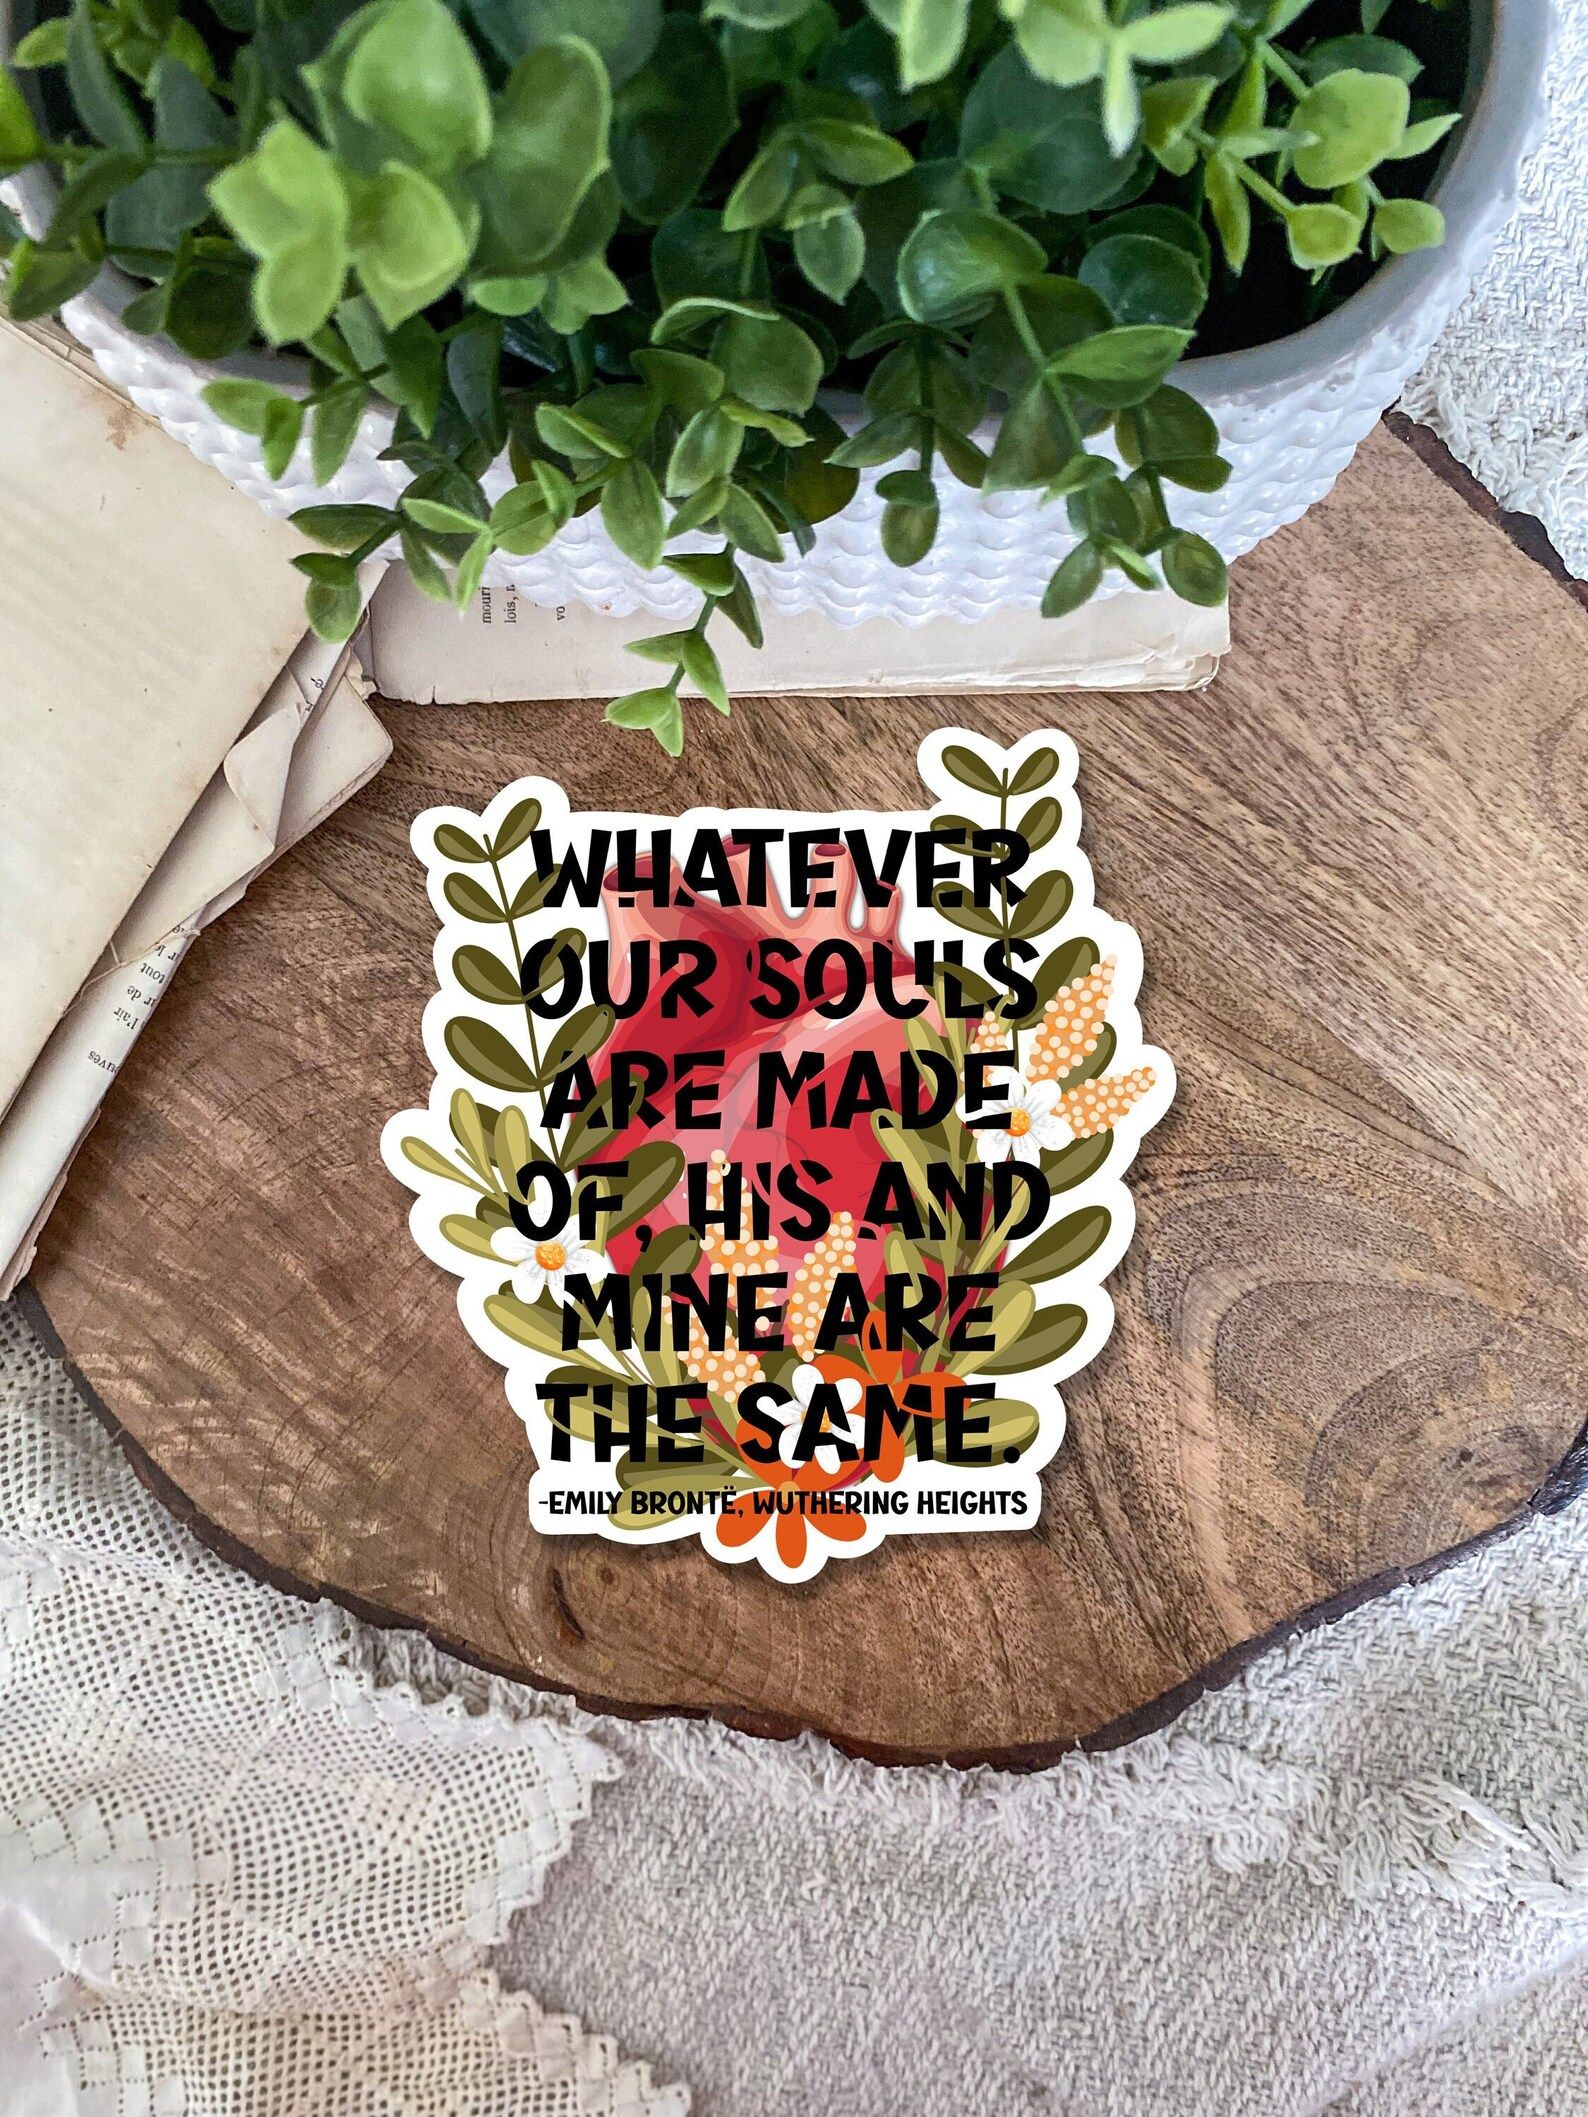 floral sticker with a quote from Emily Bronte's Wuthering Heights reading "Whatever our souls are made of, his and mine are the same."
